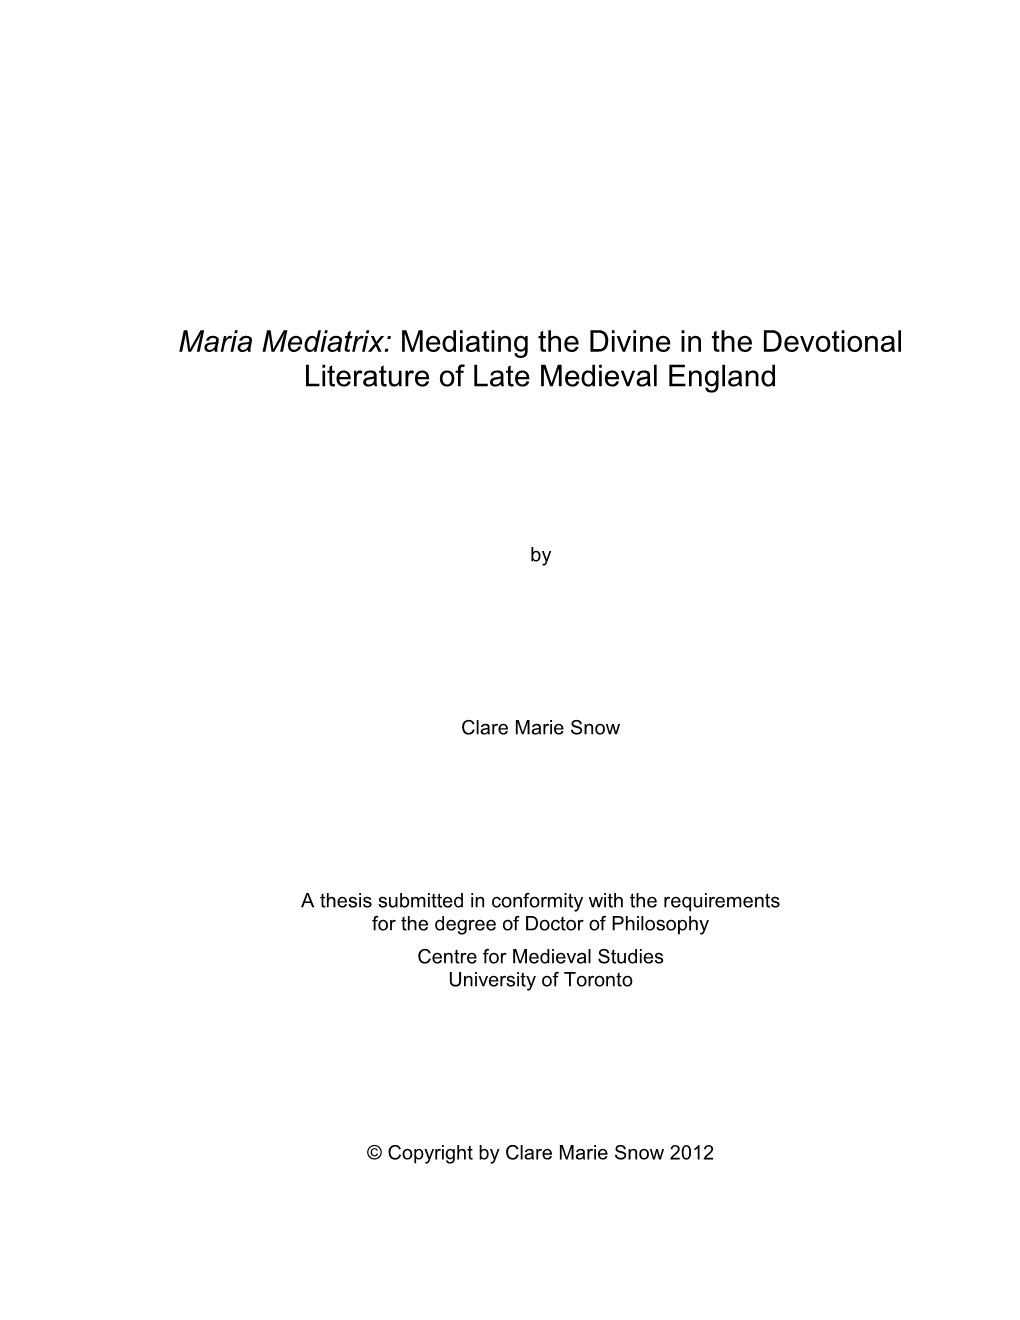 Maria Mediatrix: Mediating the Divine in the Devotional Literature of Late Medieval England